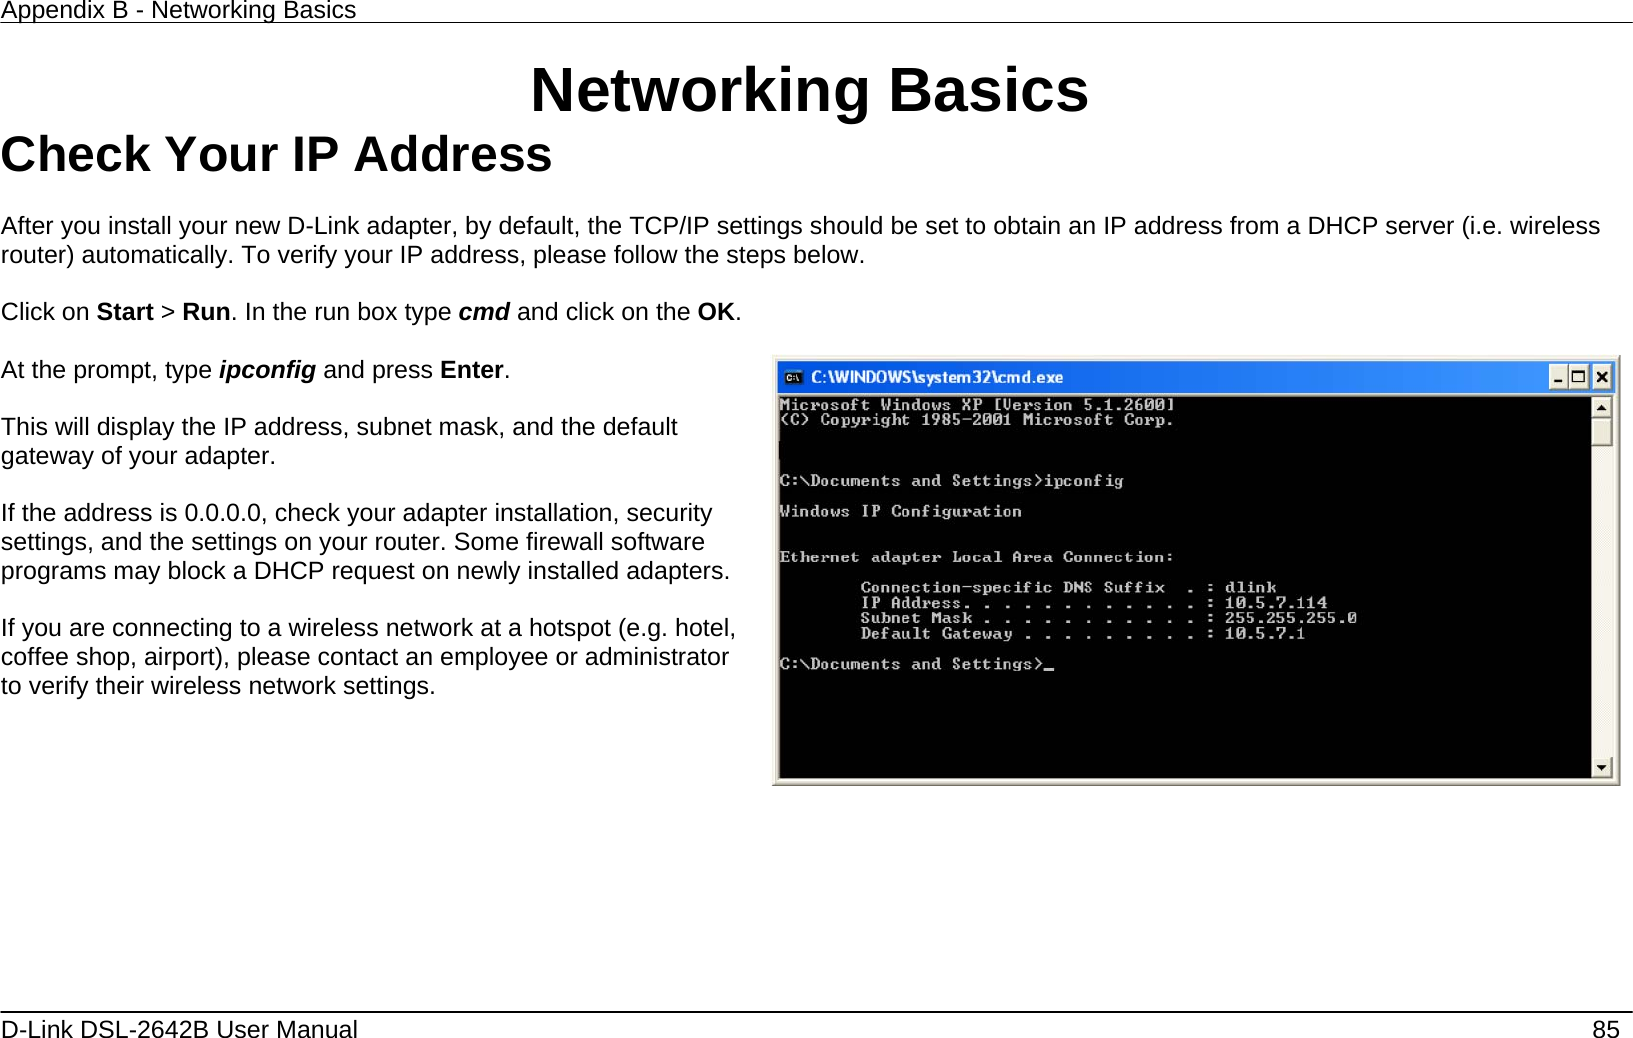 Appendix B - Networking Basics   D-Link DSL-2642B User Manual    85 Networking Basics Check Your IP Address  After you install your new D-Link adapter, by default, the TCP/IP settings should be set to obtain an IP address from a DHCP server (i.e. wireless router) automatically. To verify your IP address, please follow the steps below.  Click on Start &gt; Run. In the run box type cmd and click on the OK.  At the prompt, type ipconfig and press Enter.  This will display the IP address, subnet mask, and the default gateway of your adapter.  If the address is 0.0.0.0, check your adapter installation, security settings, and the settings on your router. Some firewall software programs may block a DHCP request on newly installed adapters.  If you are connecting to a wireless network at a hotspot (e.g. hotel, coffee shop, airport), please contact an employee or administrator to verify their wireless network settings.    